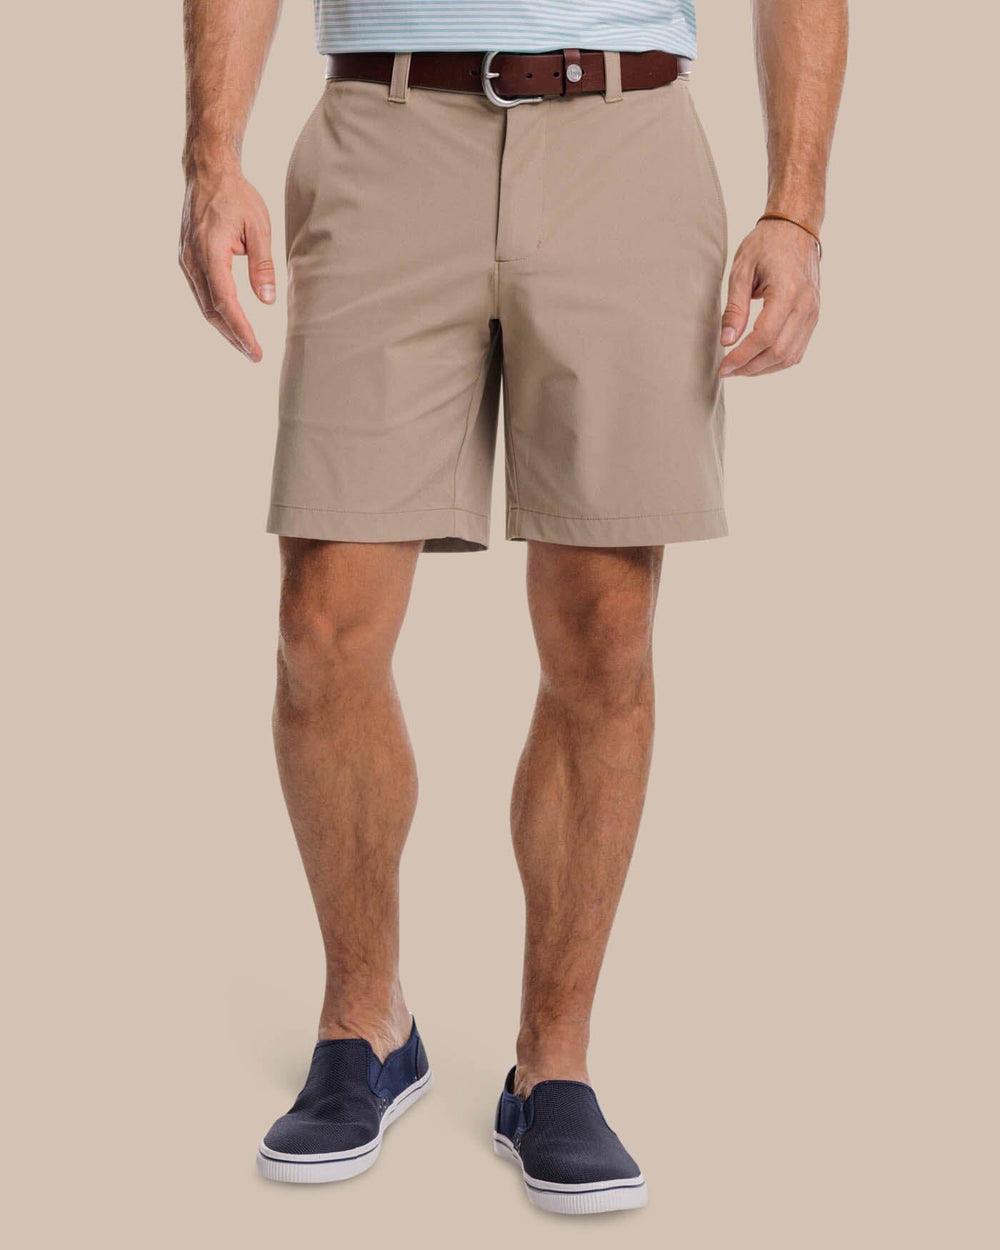 The front view of the Southern Tide brrr die performance short 1 by Southern Tide - Sandstone Khaki